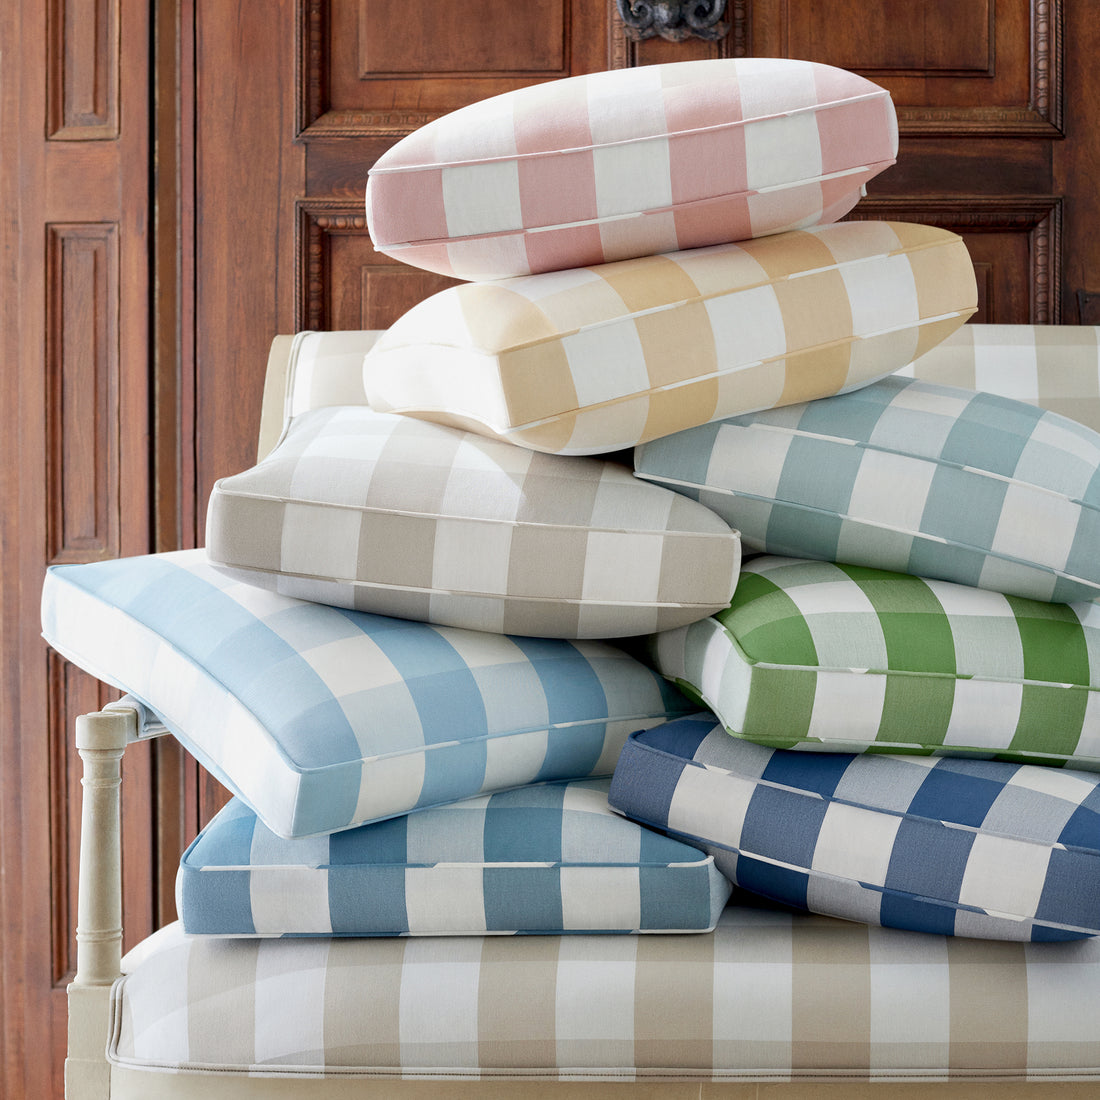 Pillows in Hammond Check woven fabric - pattern number AW24504 - by Anna French in the Devon collection